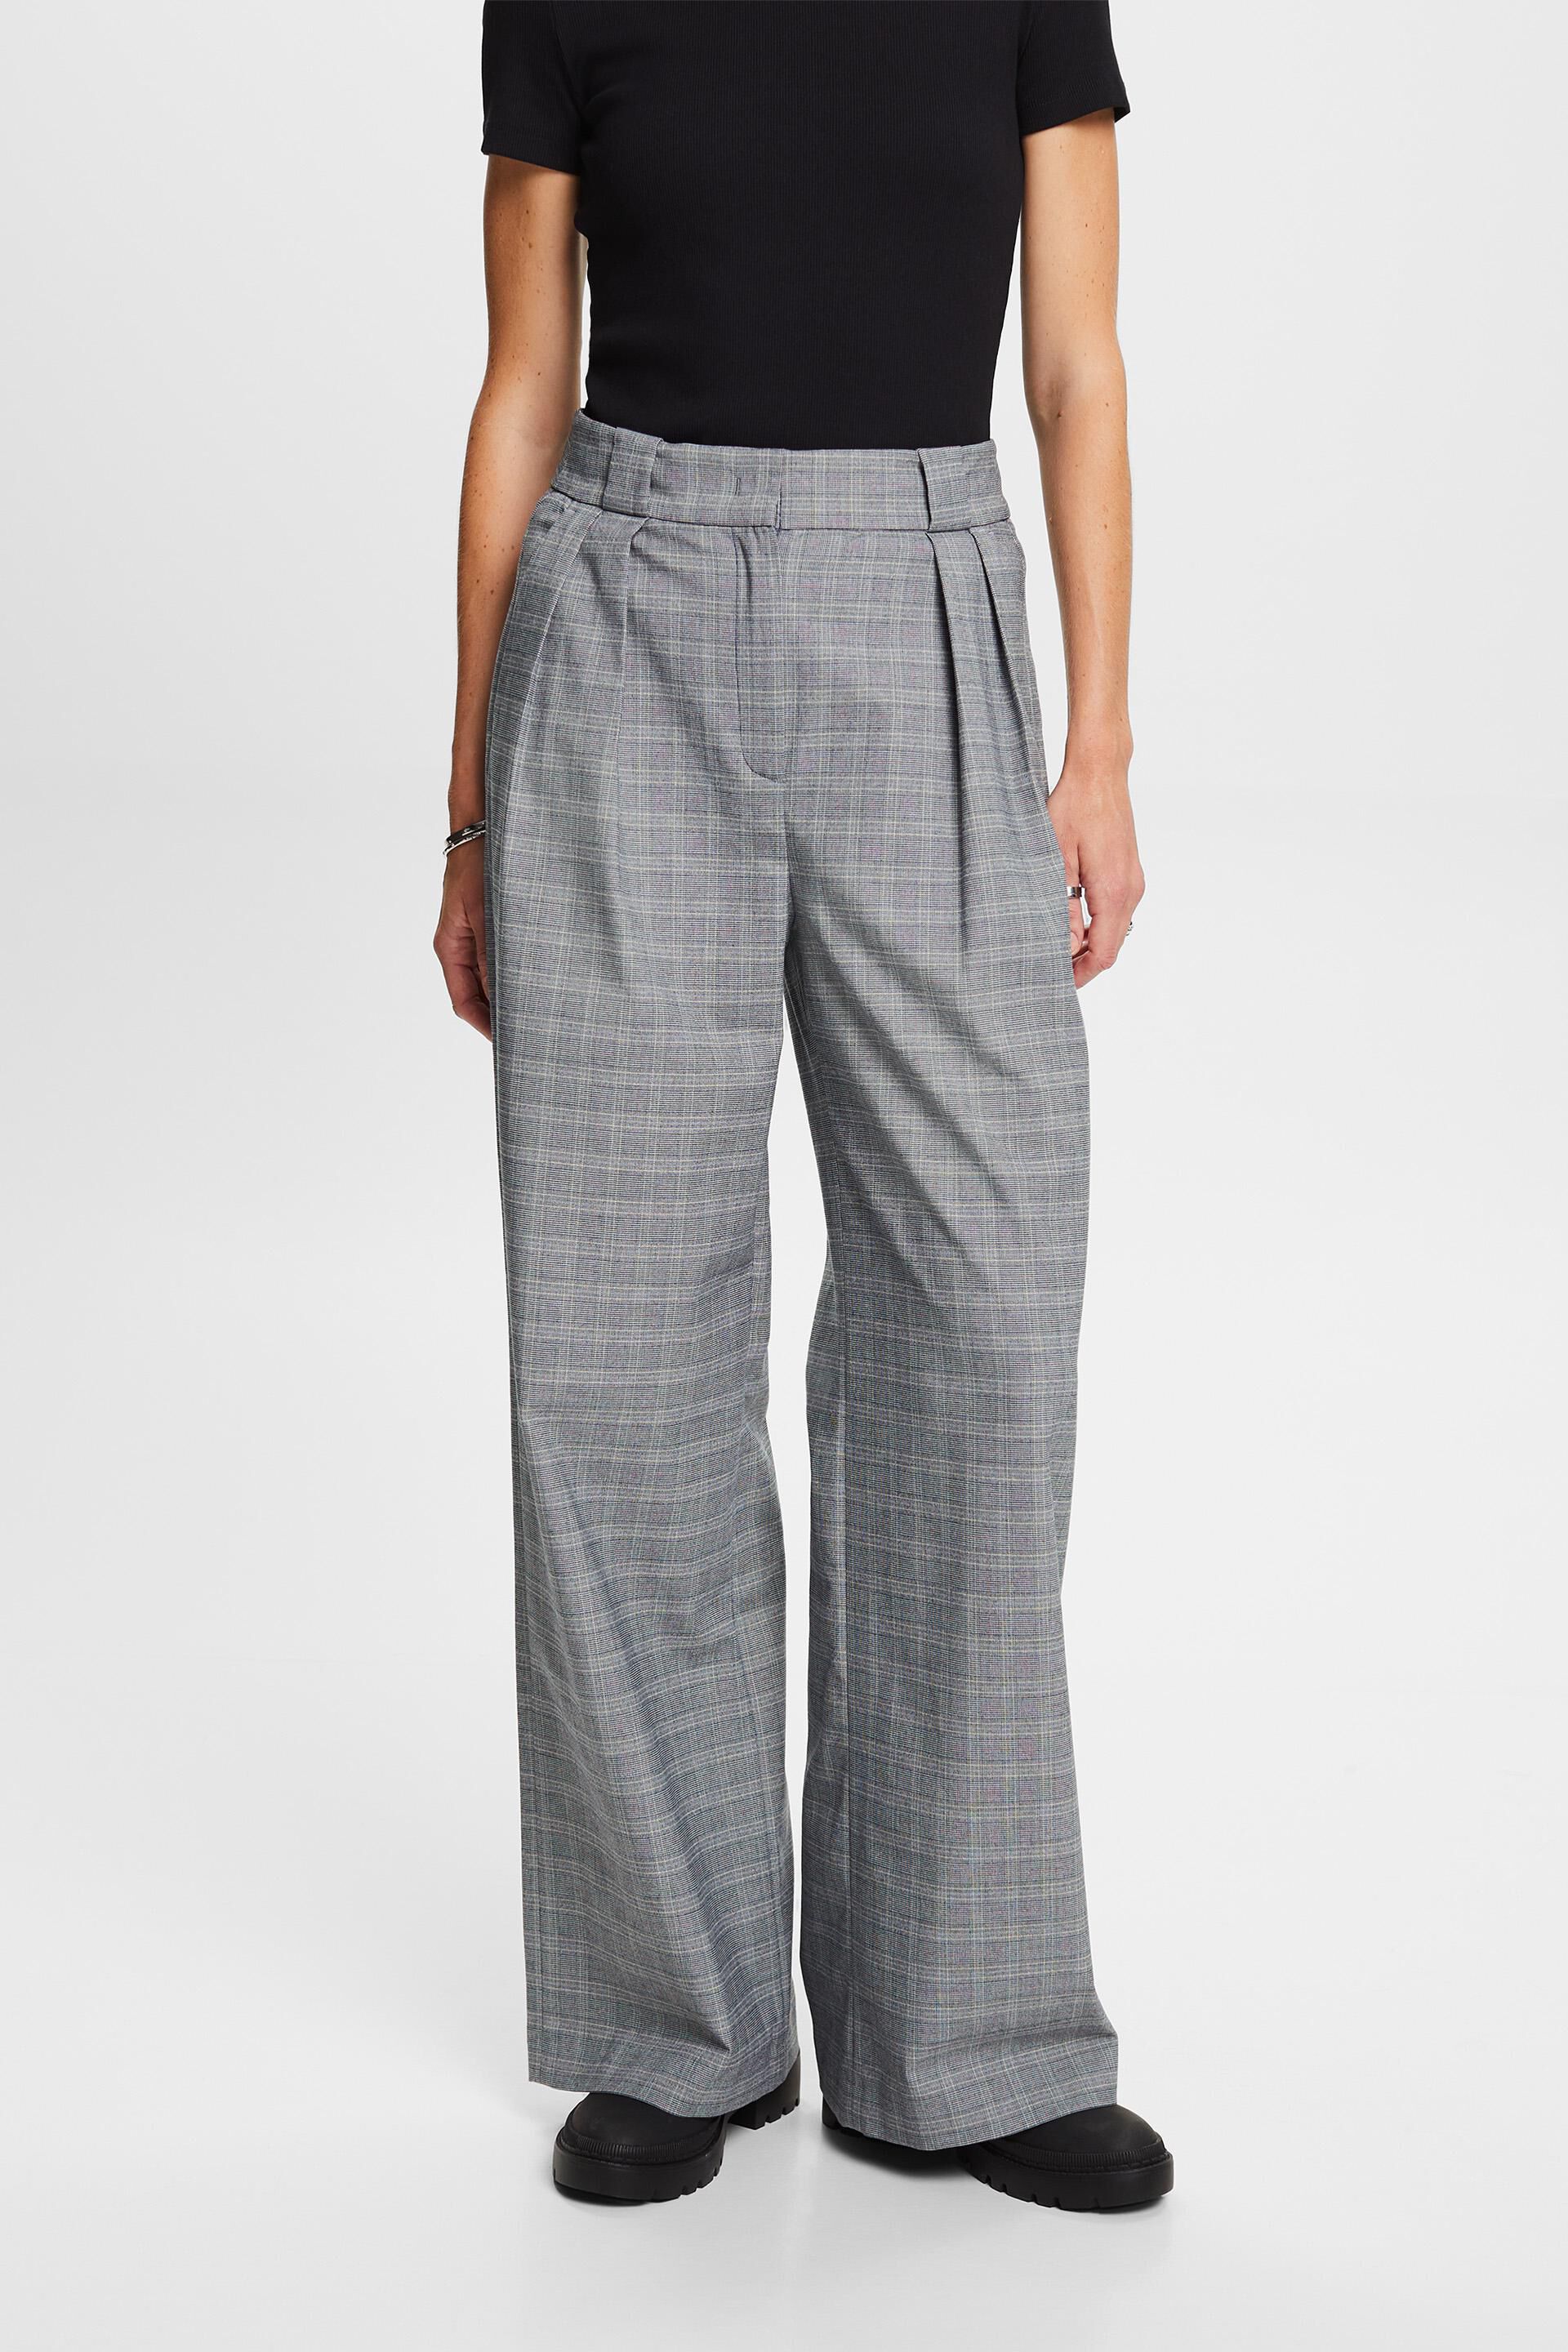 Esprit Damen Mix & Match: Prince of Wales checked trousers